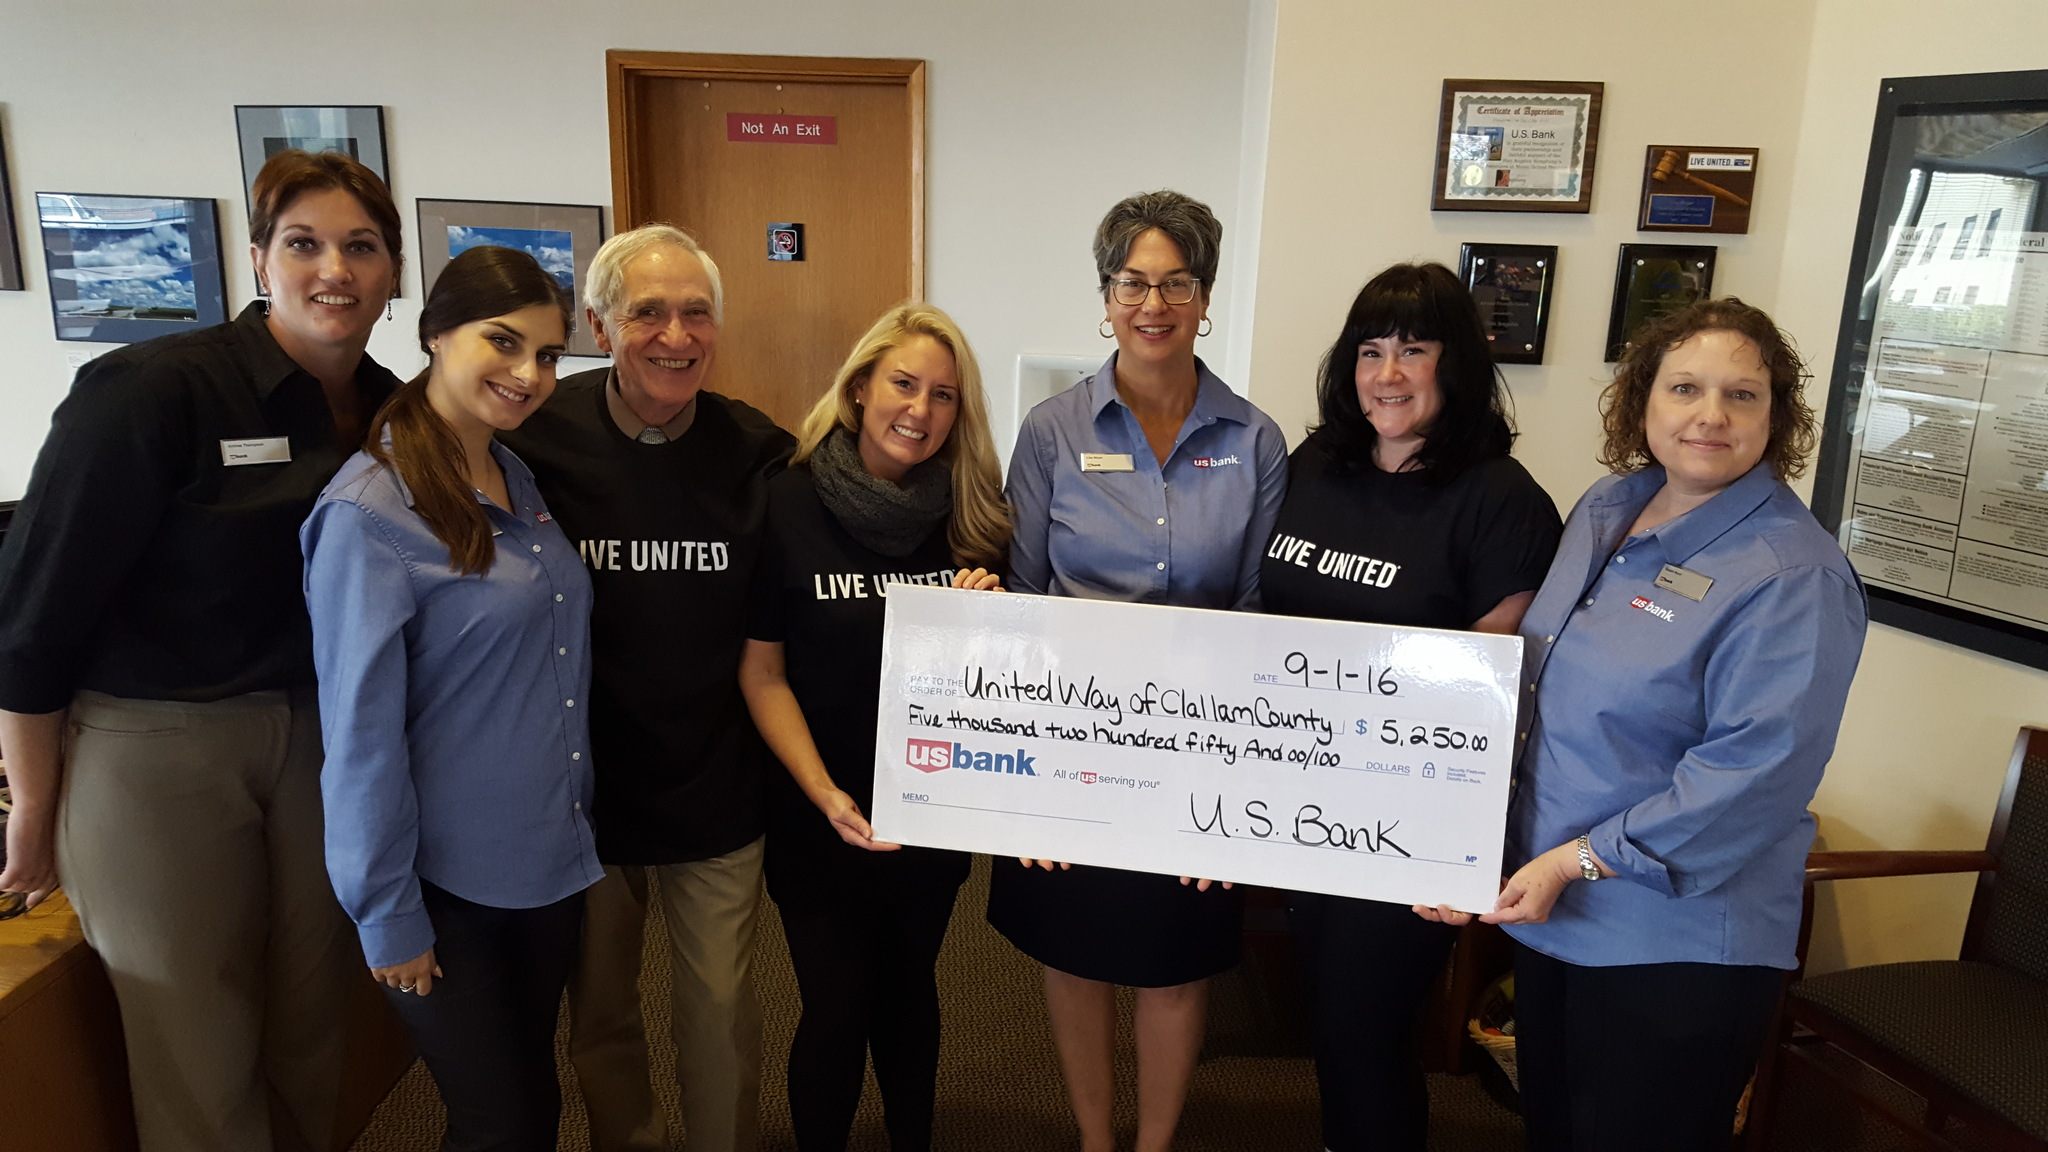 United Way recently accepted a donation for $5